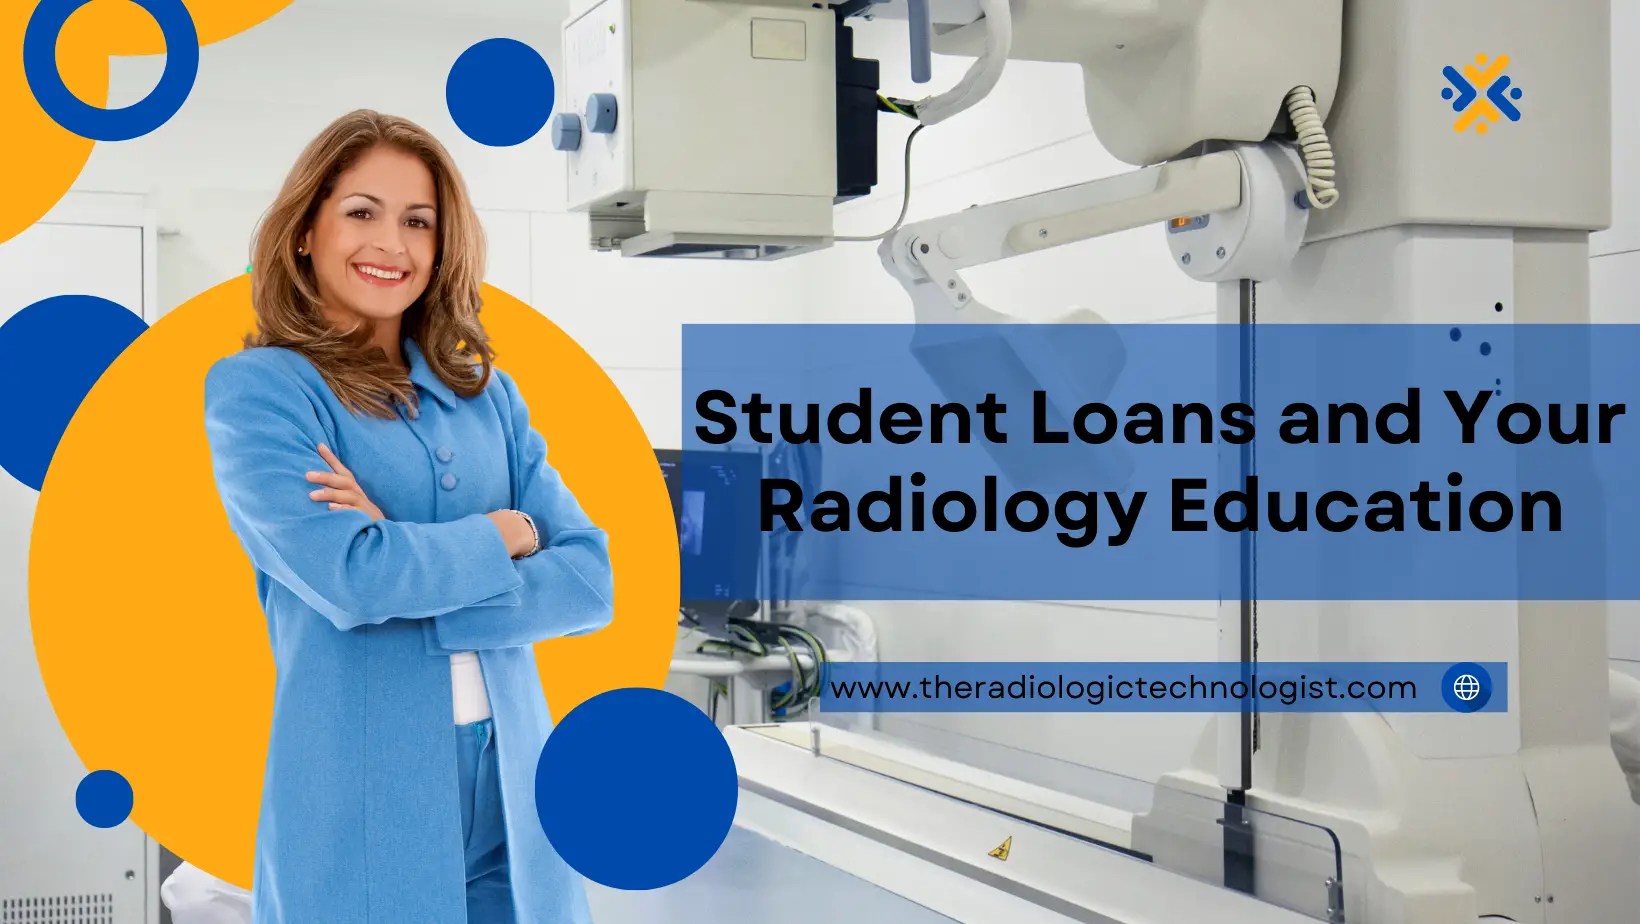 Student Loans and Your Radiology Education